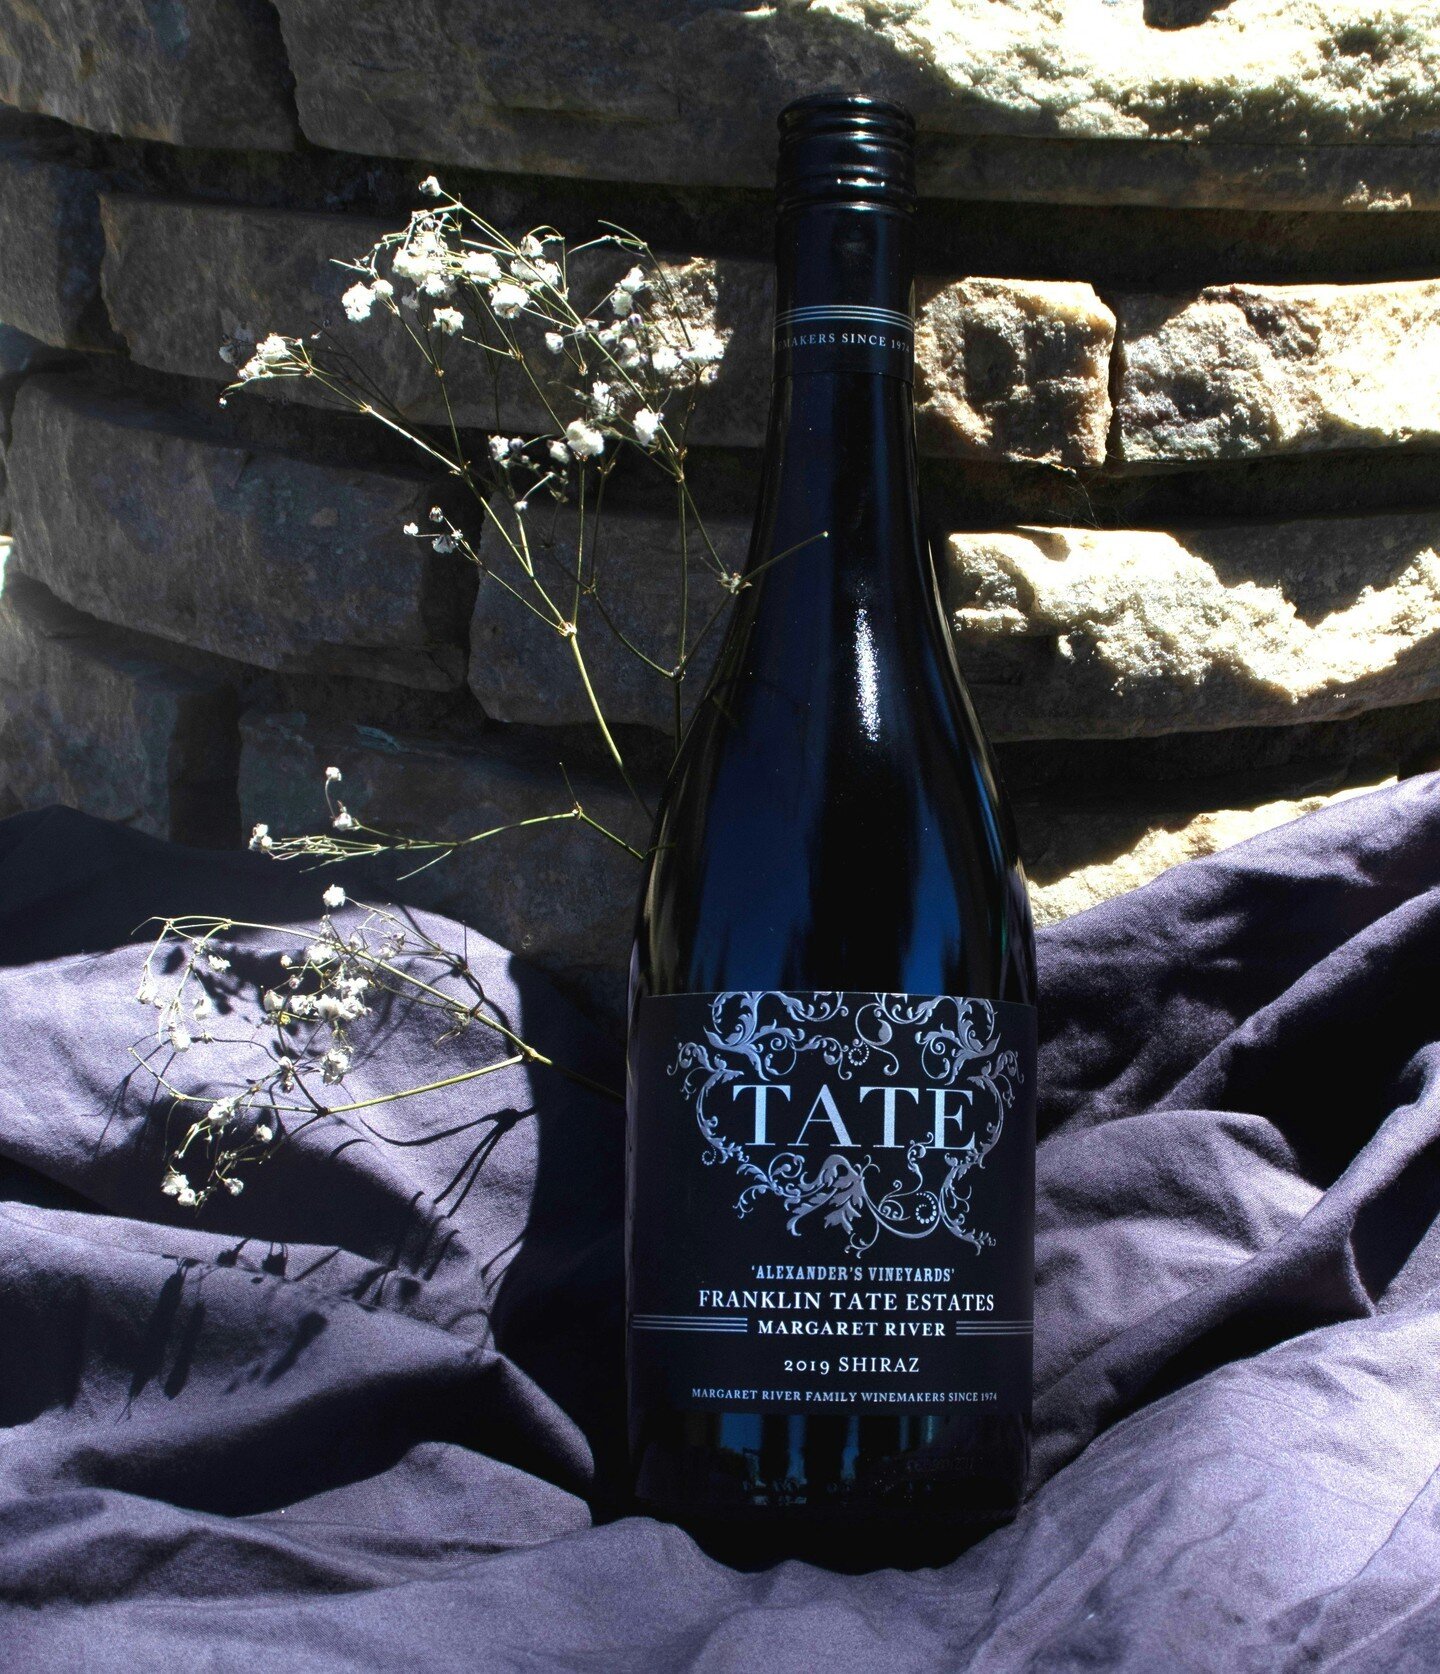 A perfect weekend Wine, Franklin Tate Estate Shiraz reflects the nose, with flavours of plums and blueberries balanced with dark mulberries and chocolate.